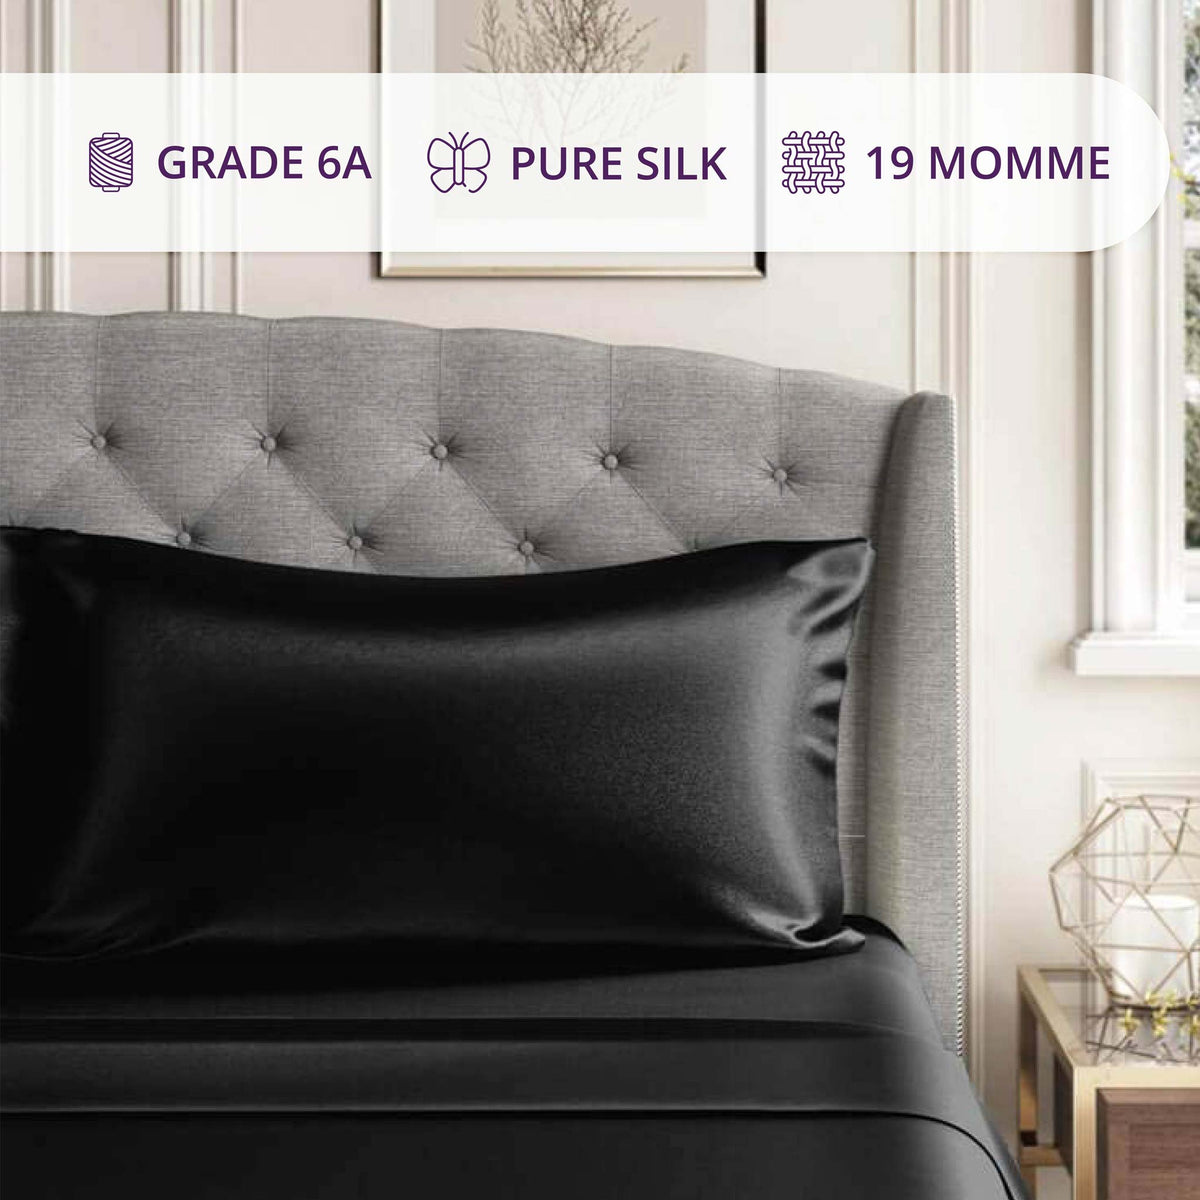 Front View of Mulberry Park Silks Deluxe 19 Momme Pure Silk Pillowcase in Black Color